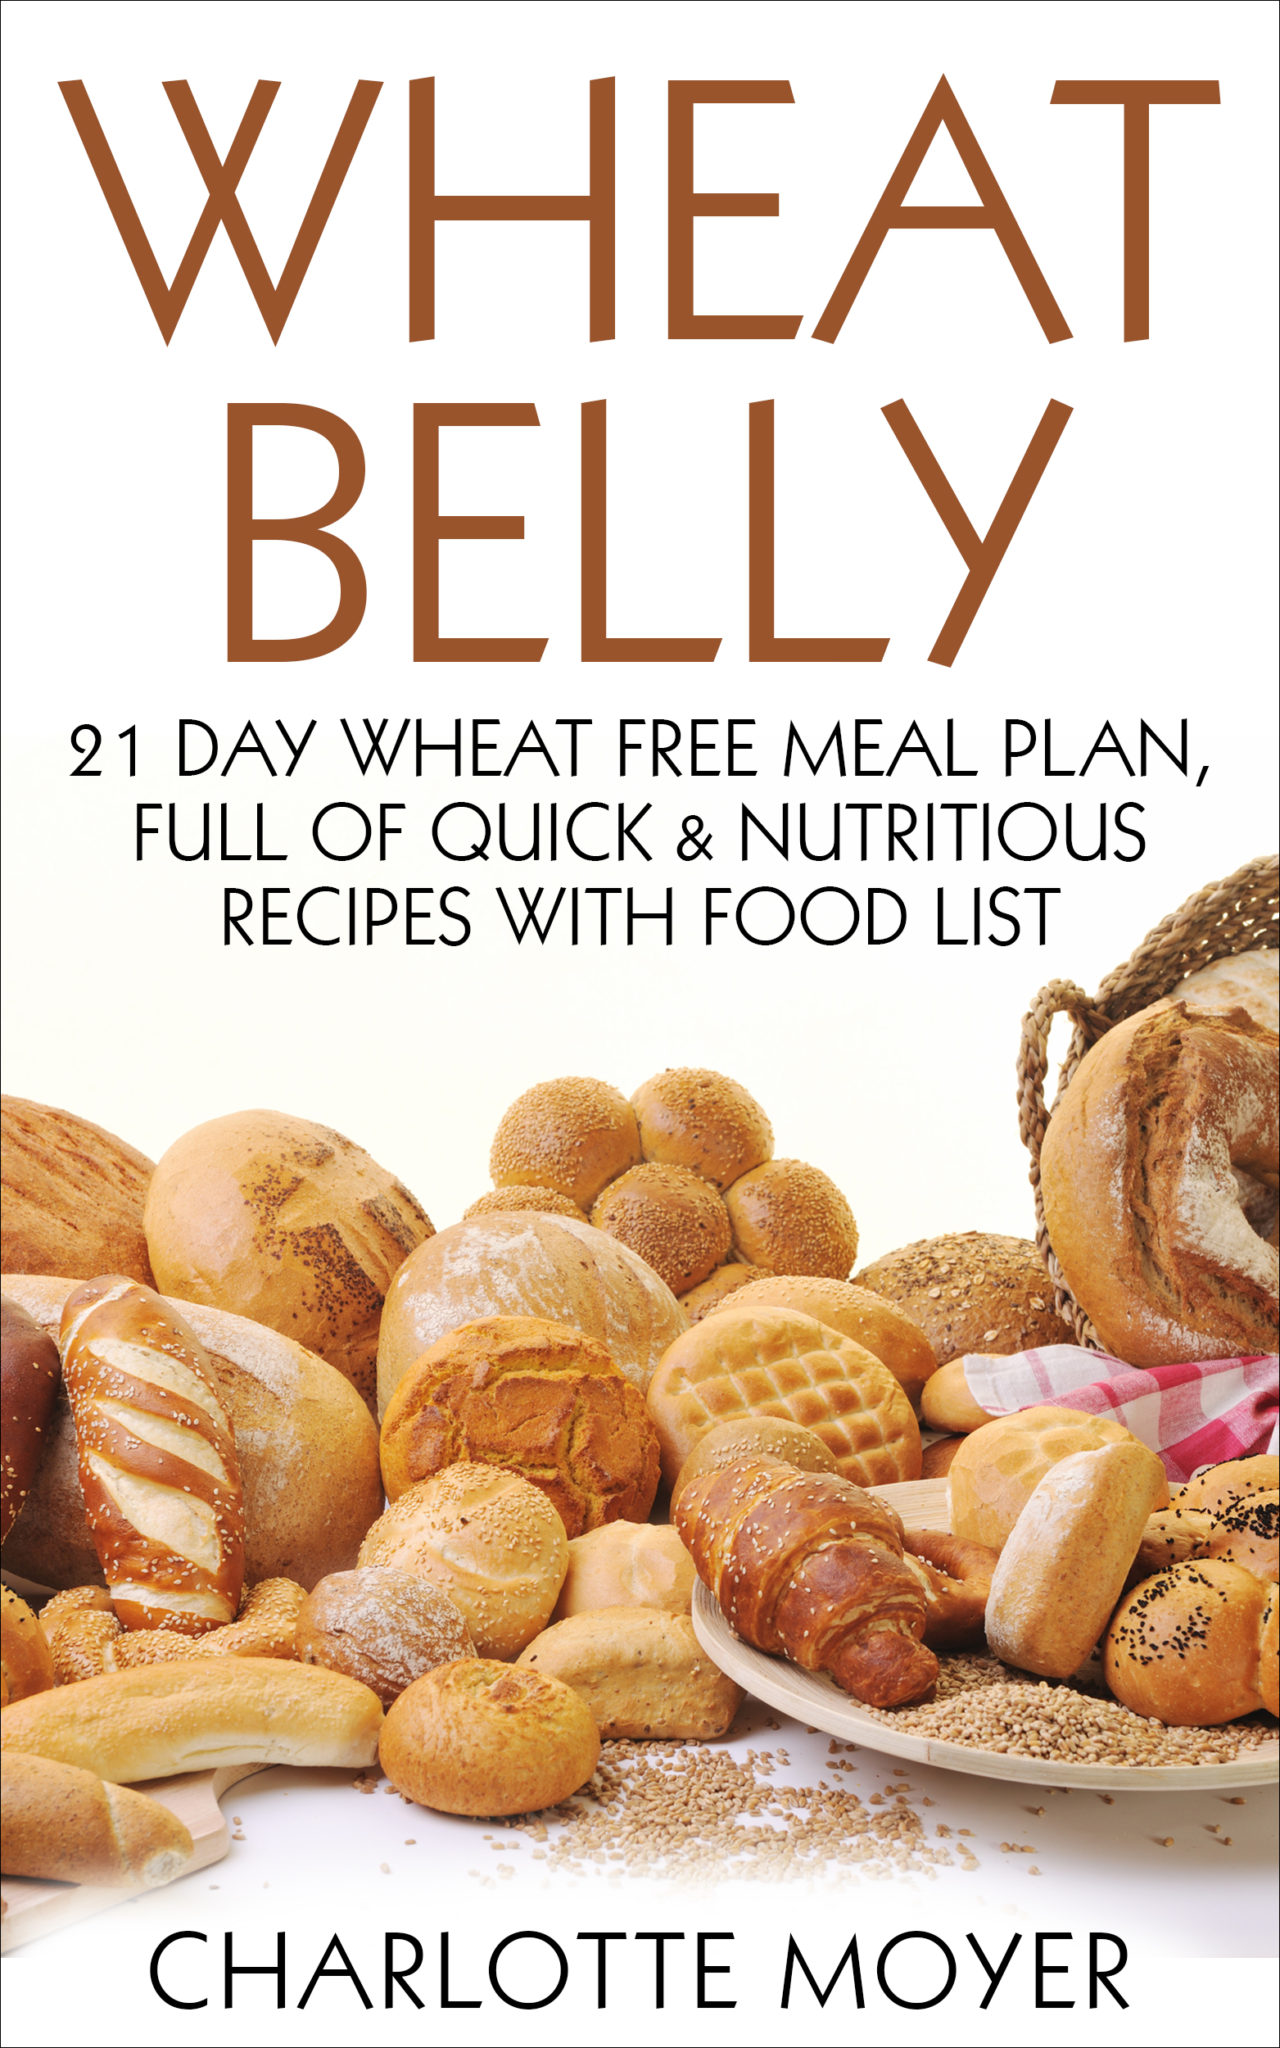 FREE: Wheat Belly: 21 Day Wheat-Free Meal Plan, Full of Quick and Nutritious Recipes with Food List by Charlotte Moyer